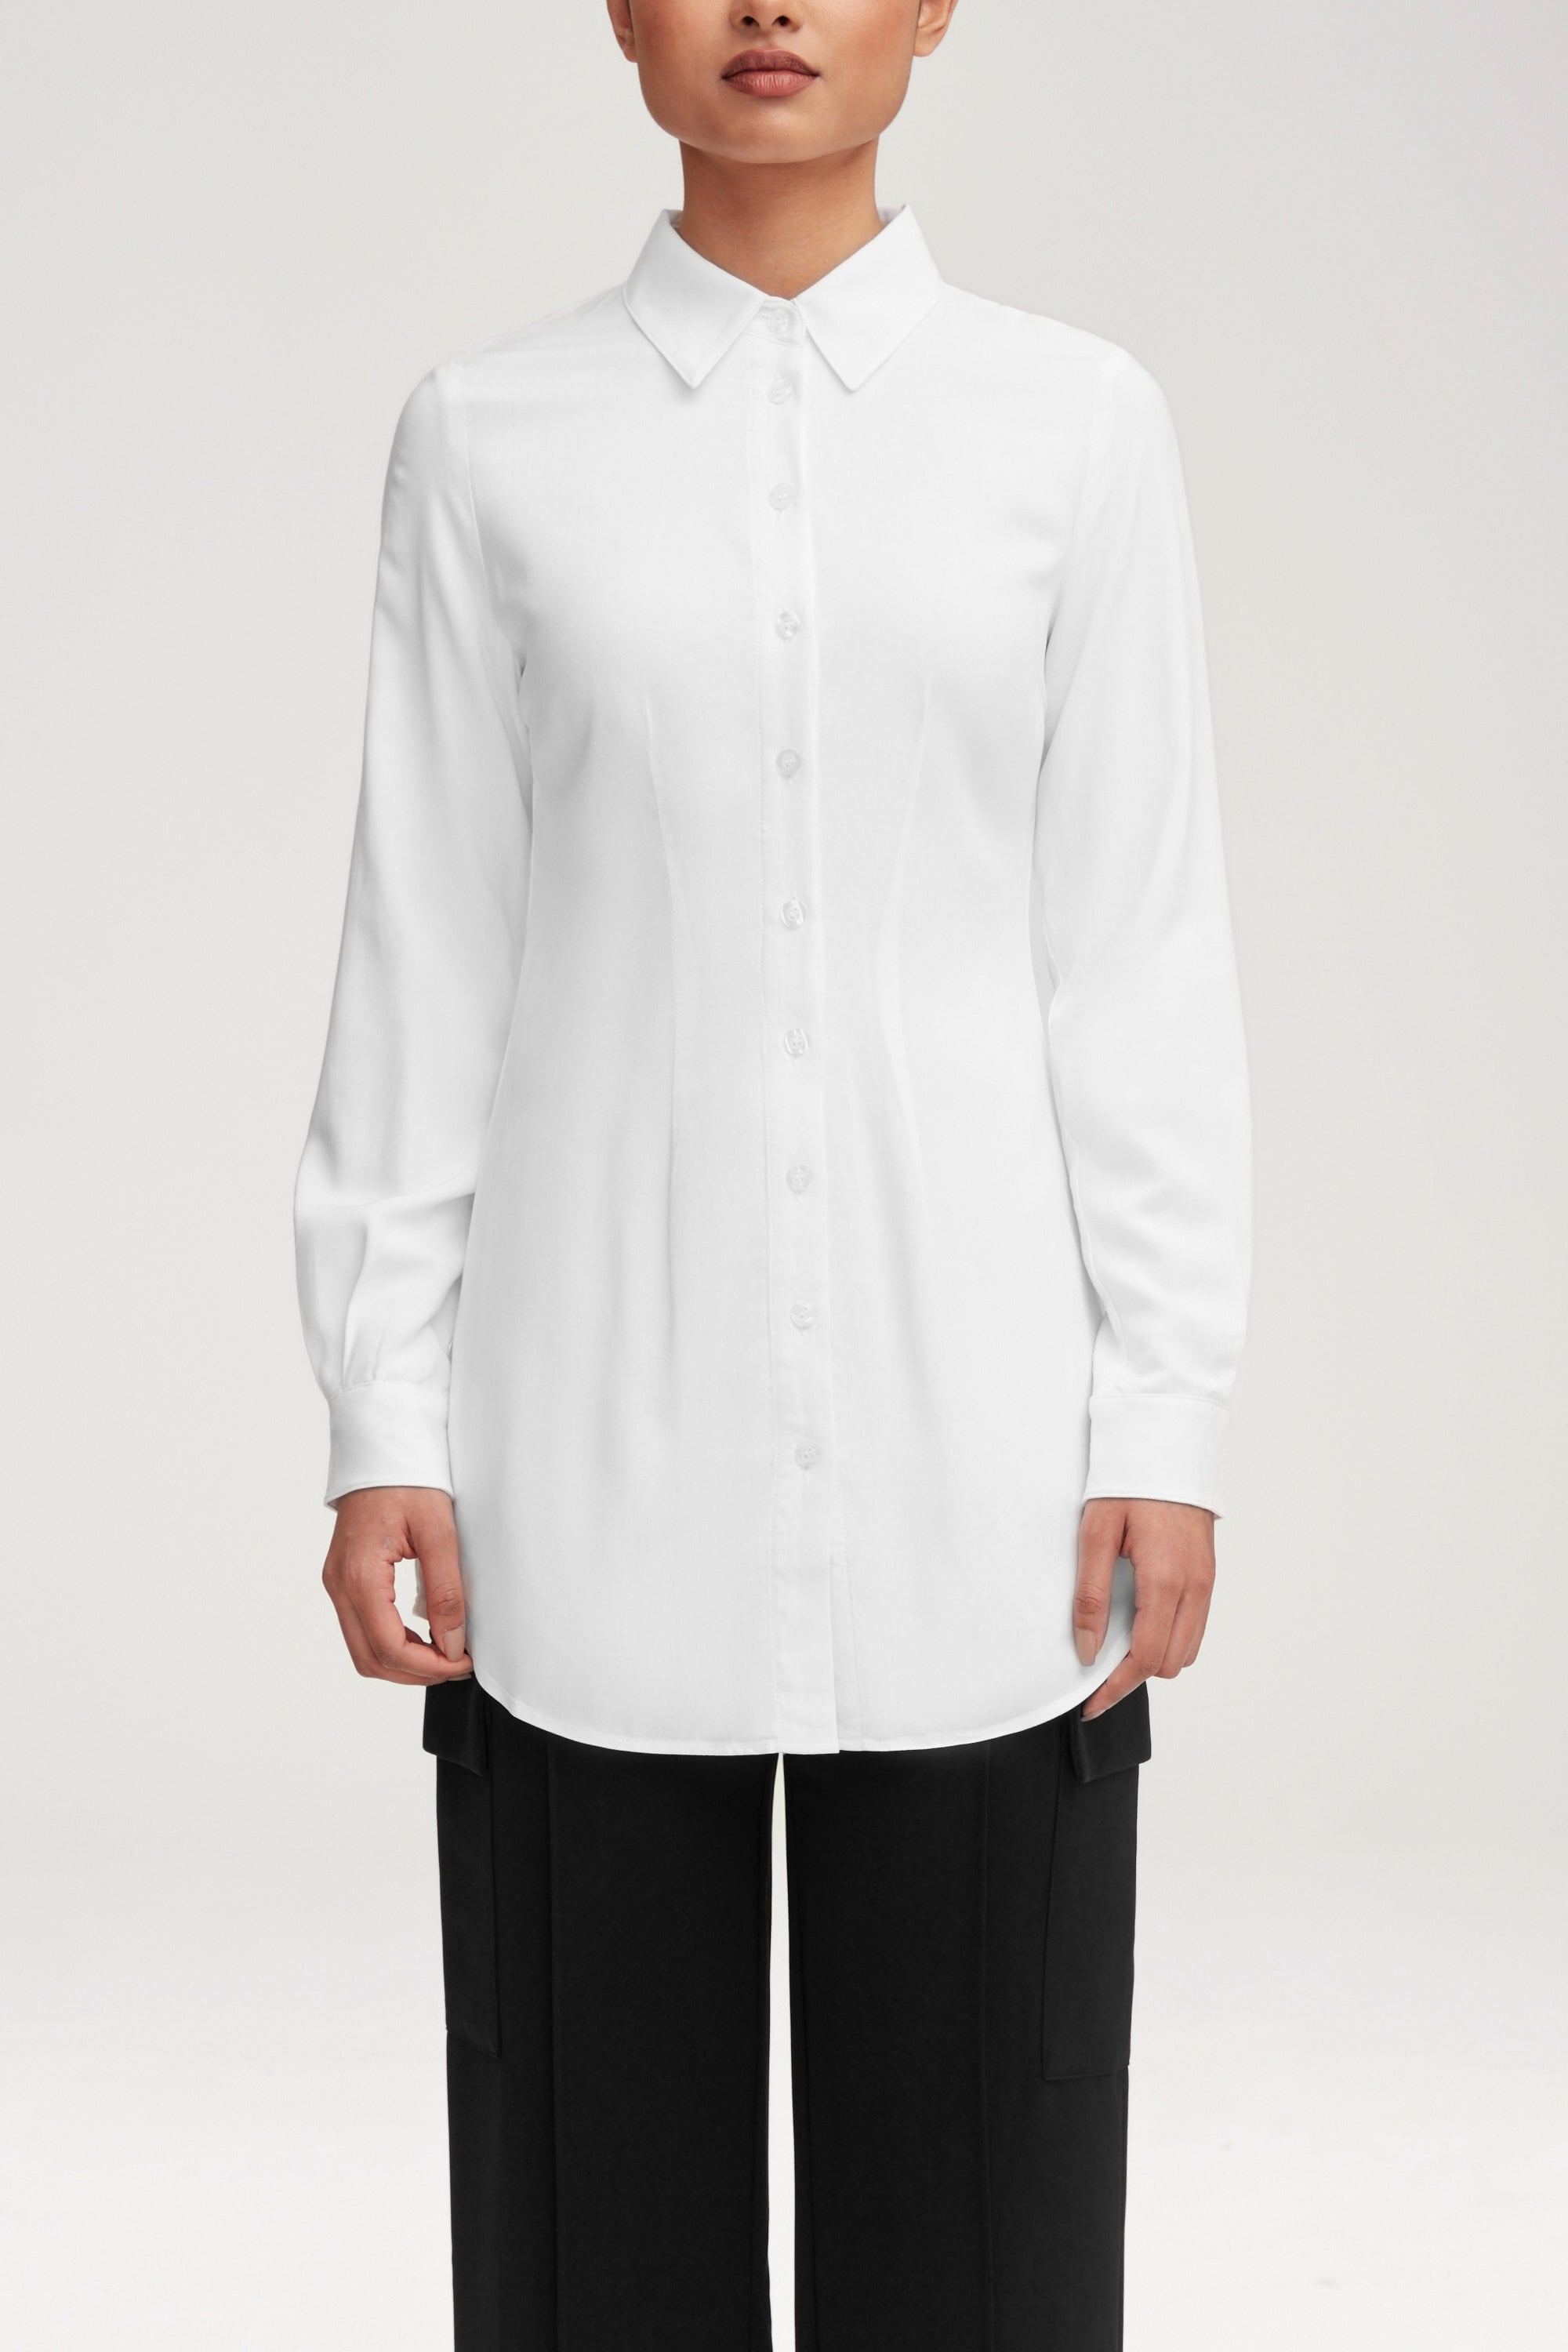 Sarah Fitted Button Down Top - White Clothing Veiled 